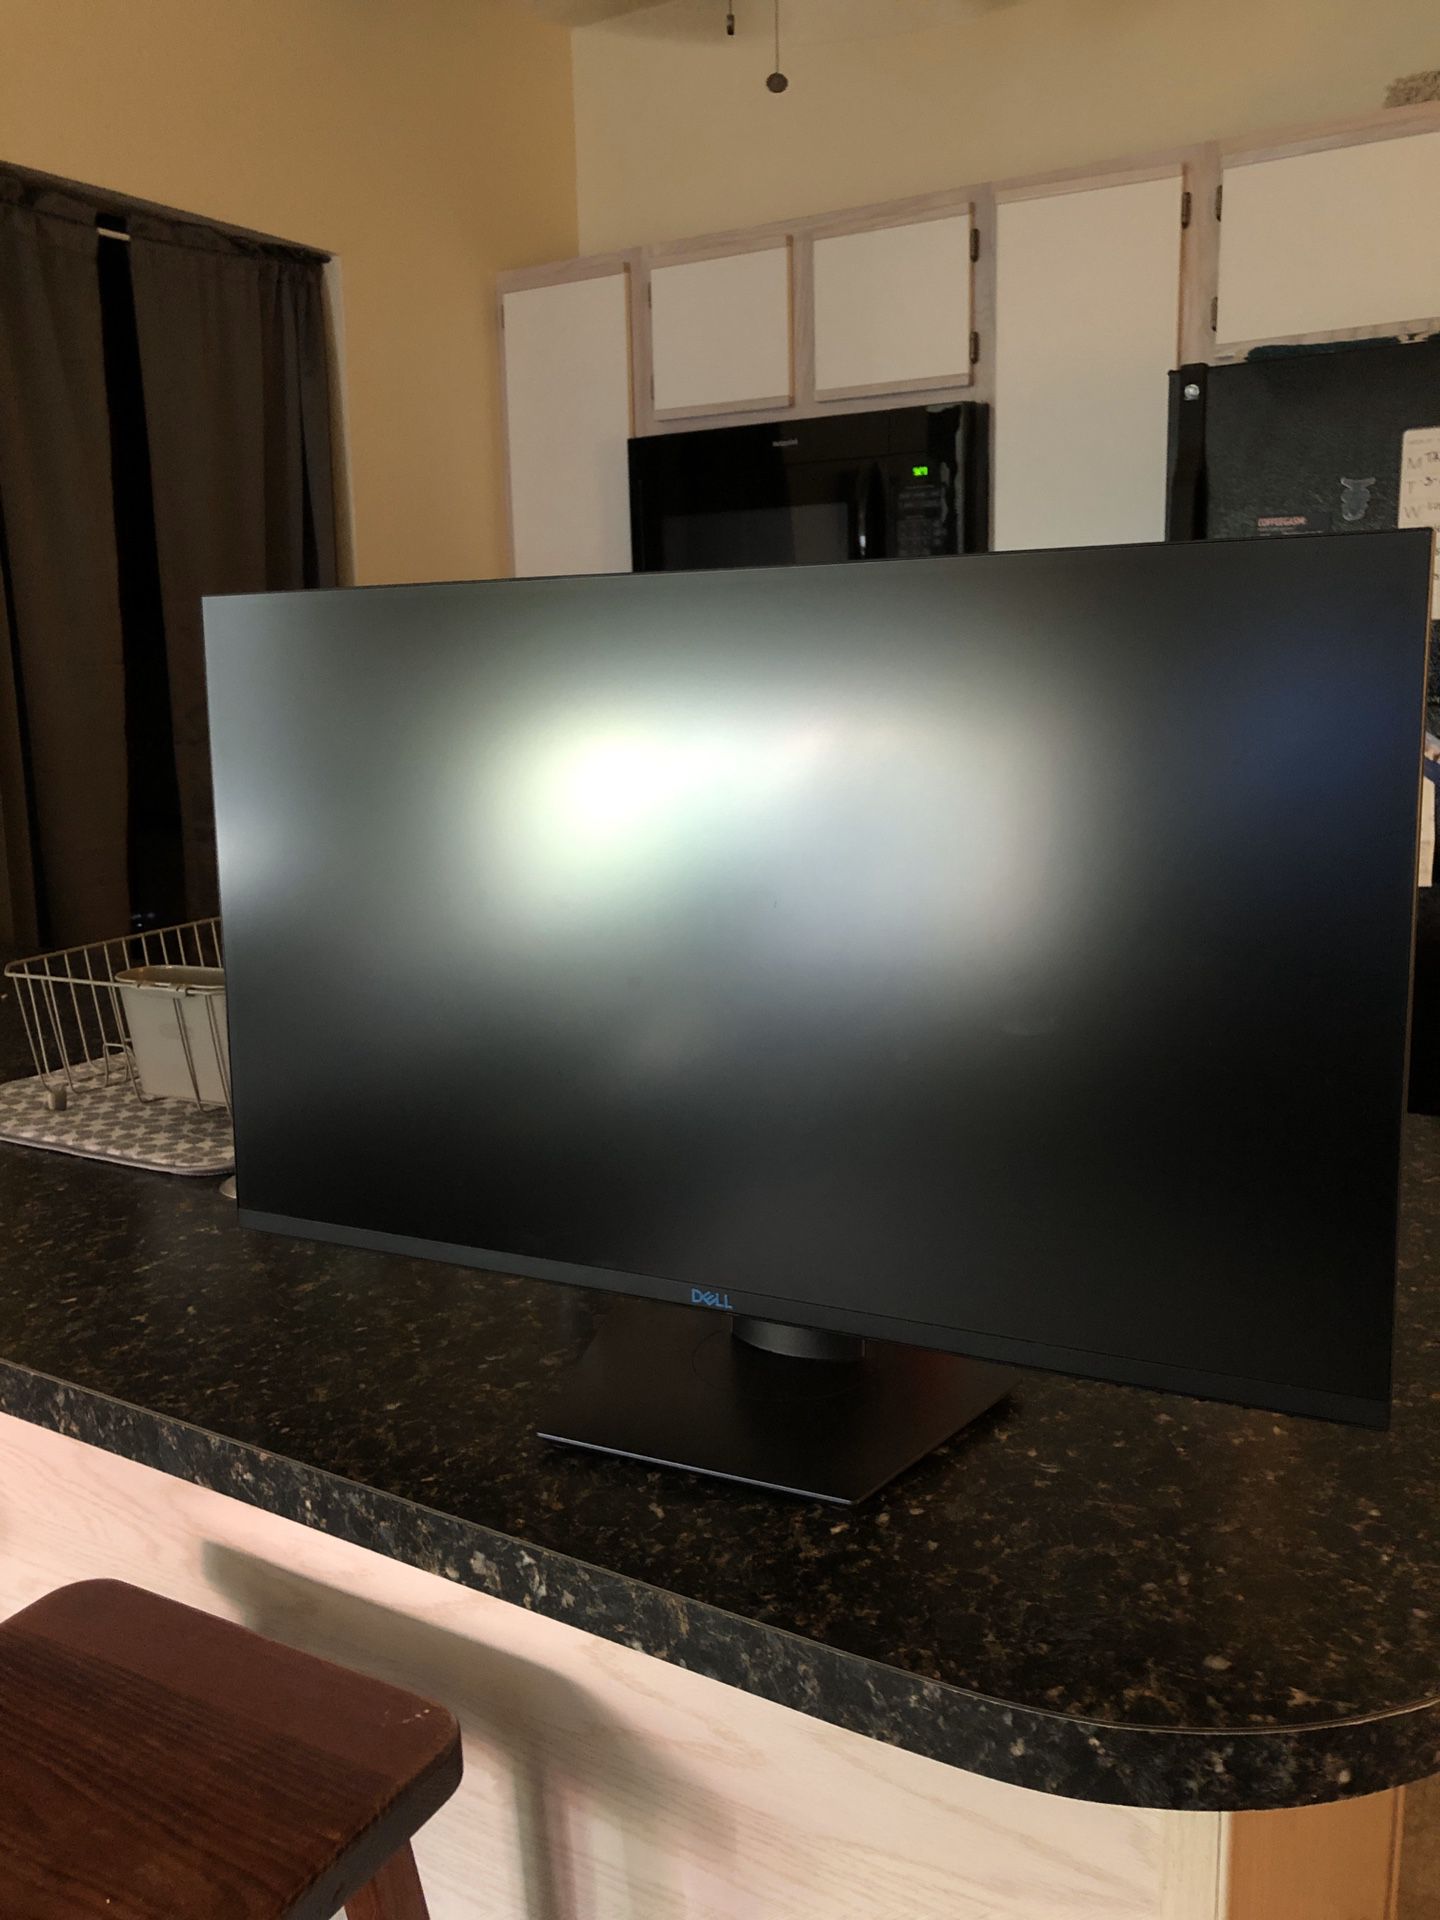 Dell S2719DGF Gaming Monitor / 144hz 1440p 27in / Excellent condition!